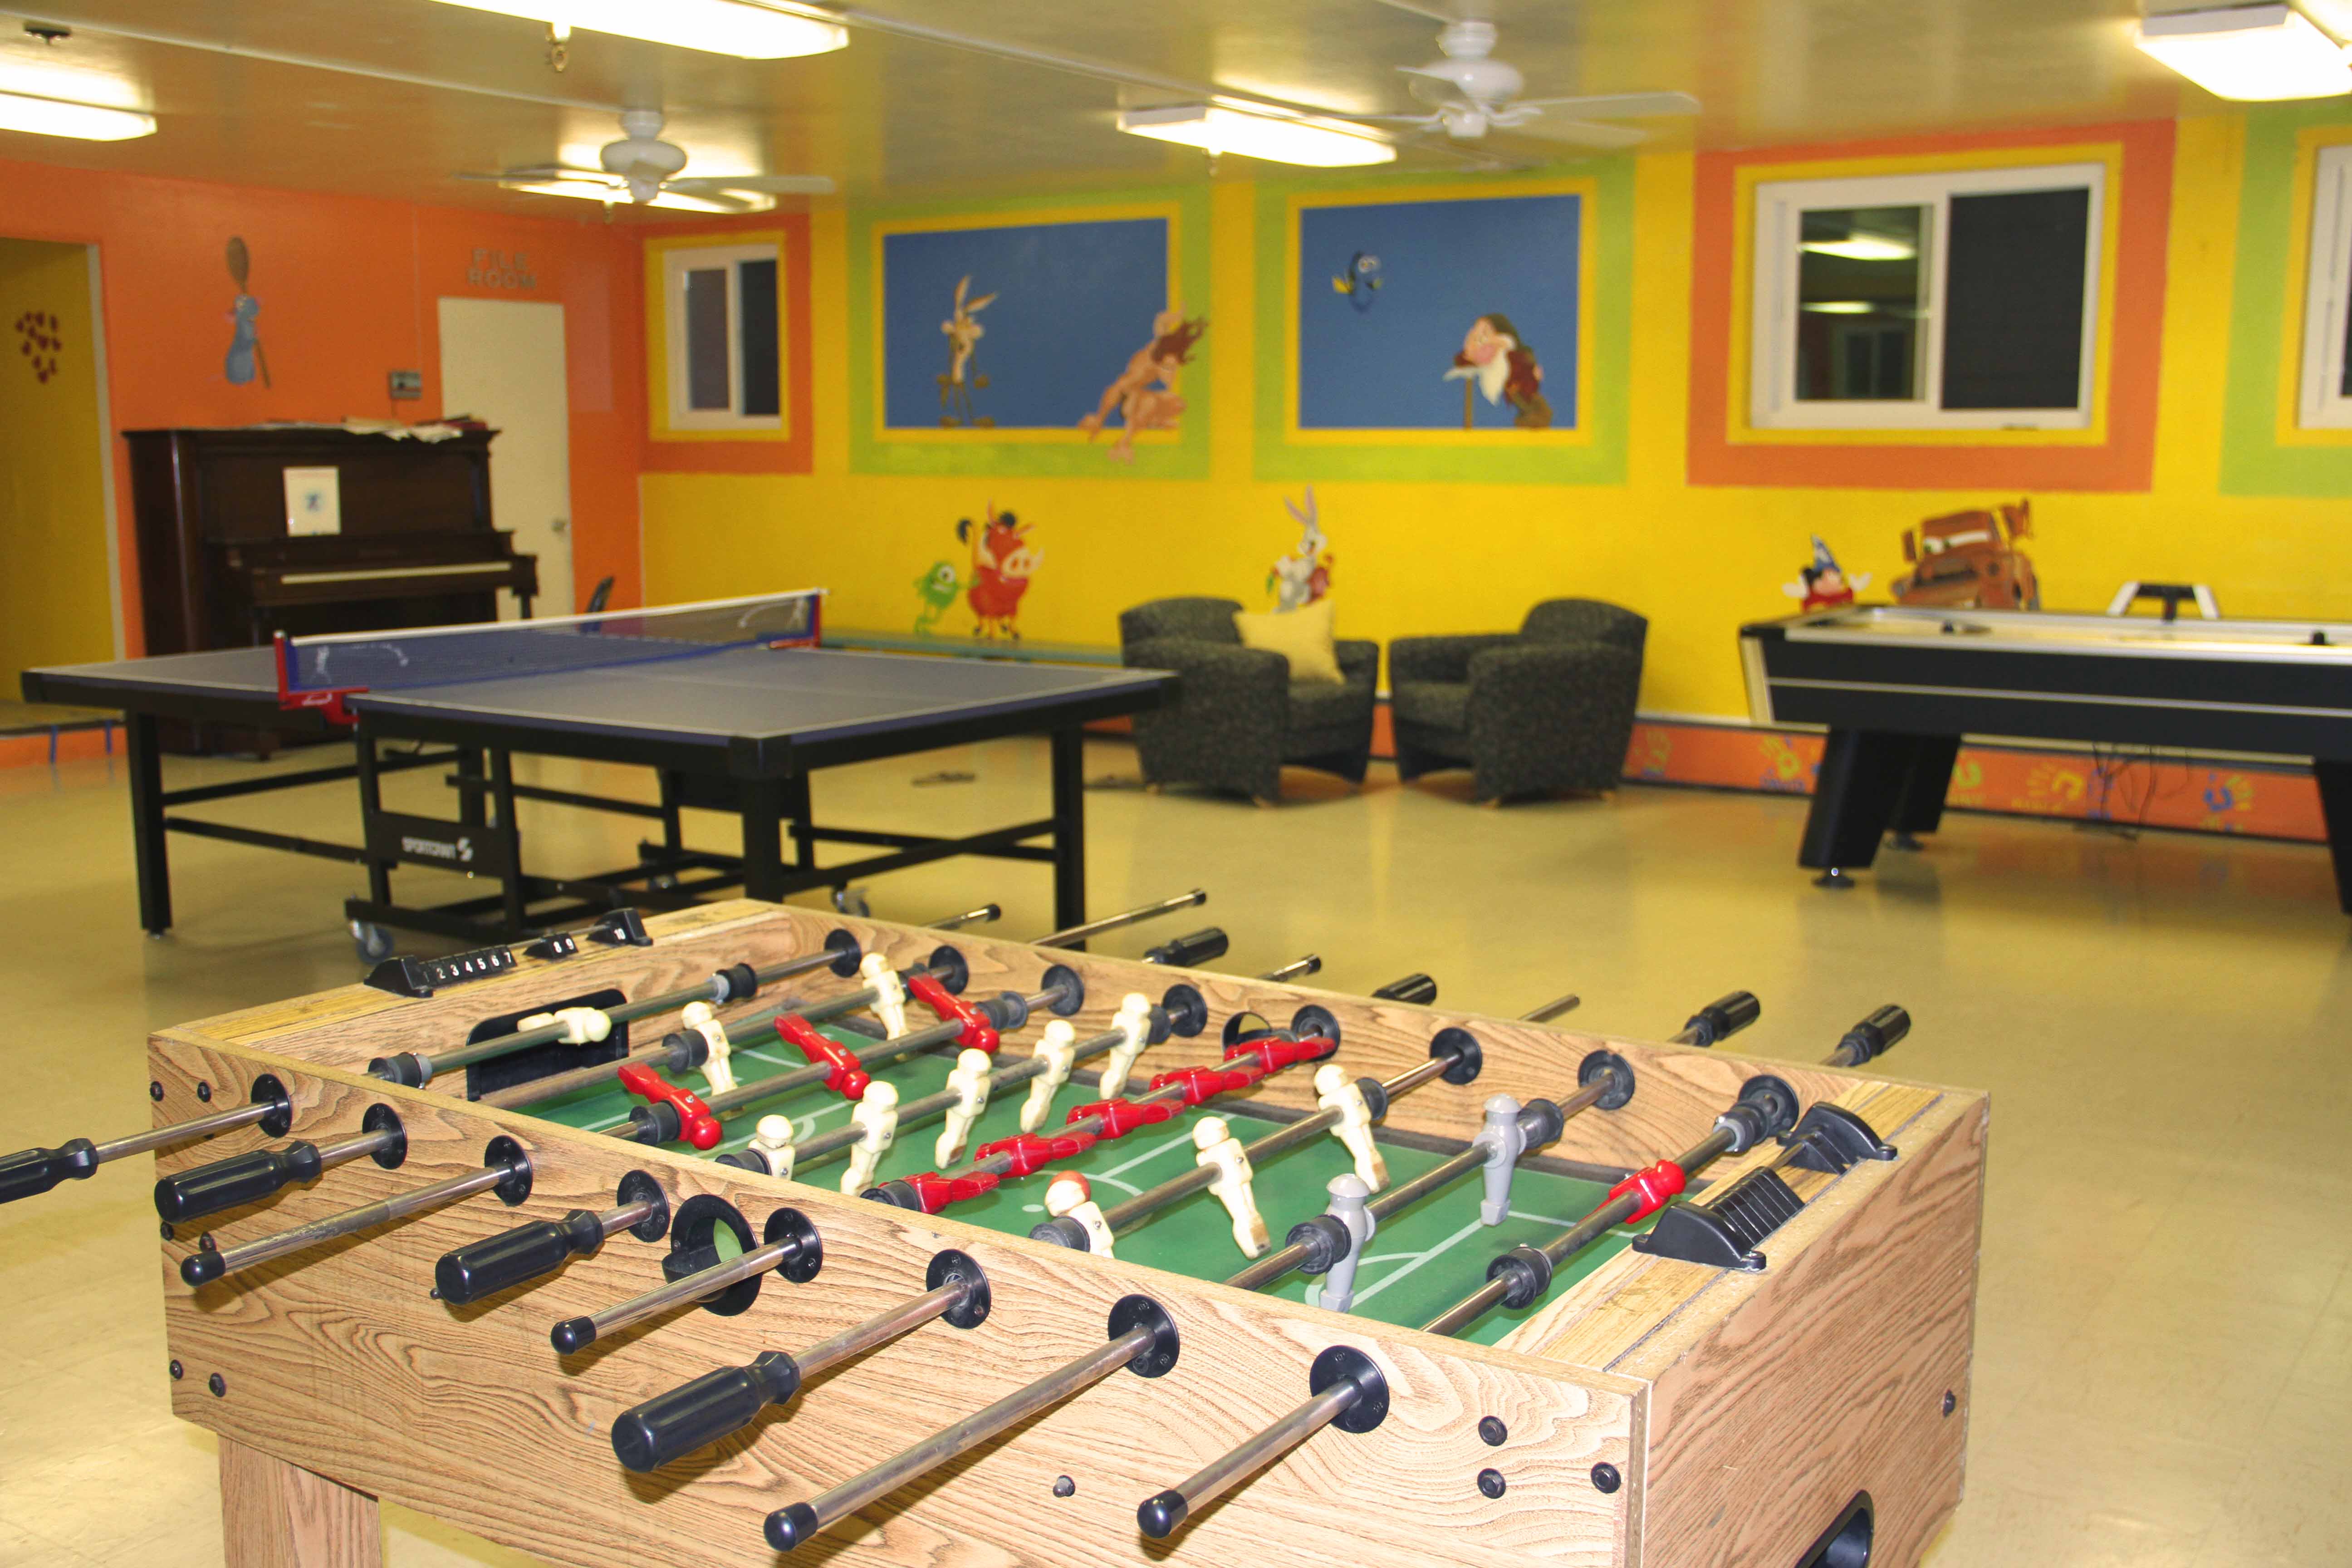 Residents Playing Fussball in Recreation Room